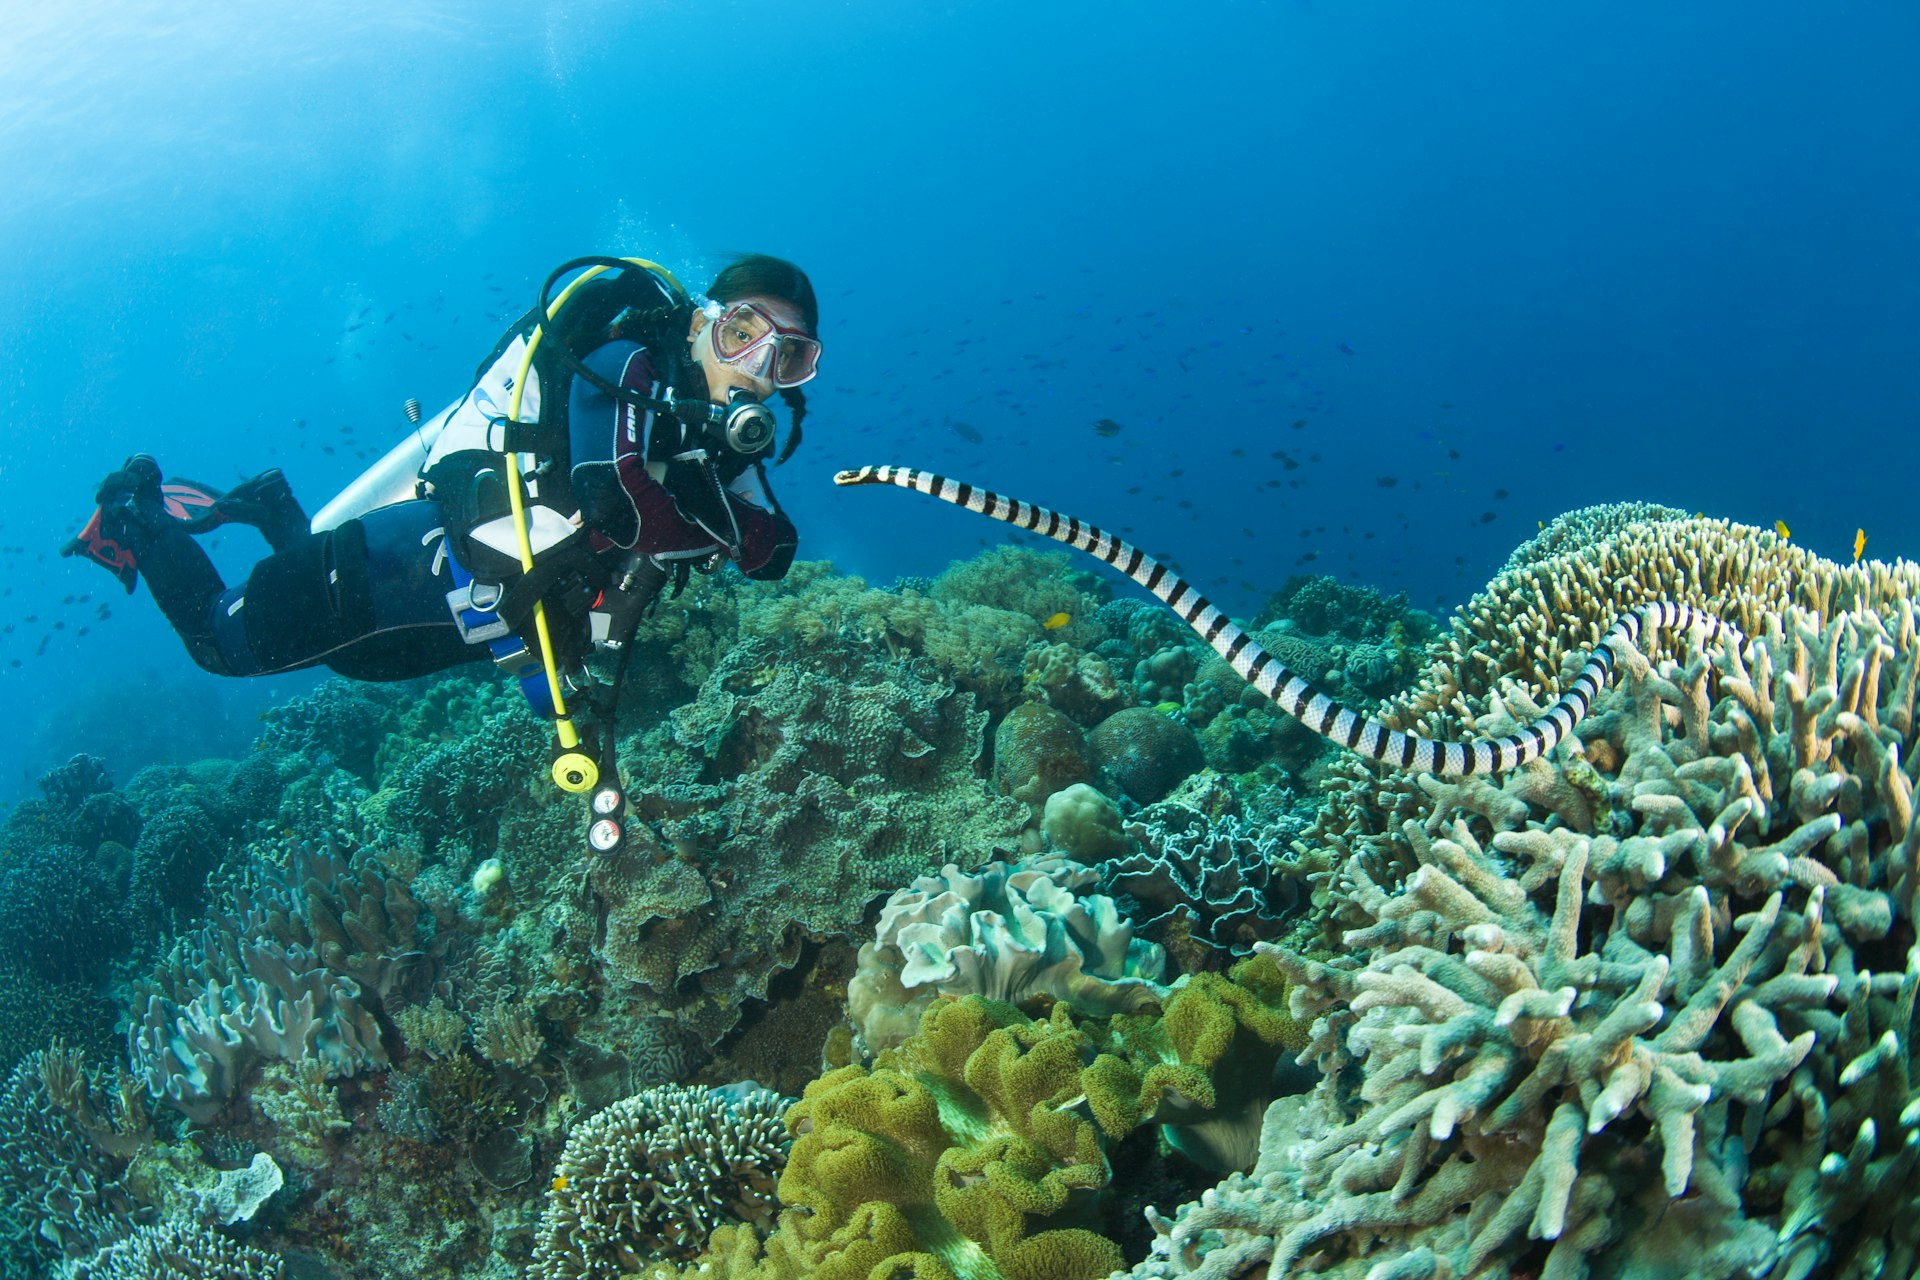 A diver watches a banded sea snake near Apo Island, the Philippines